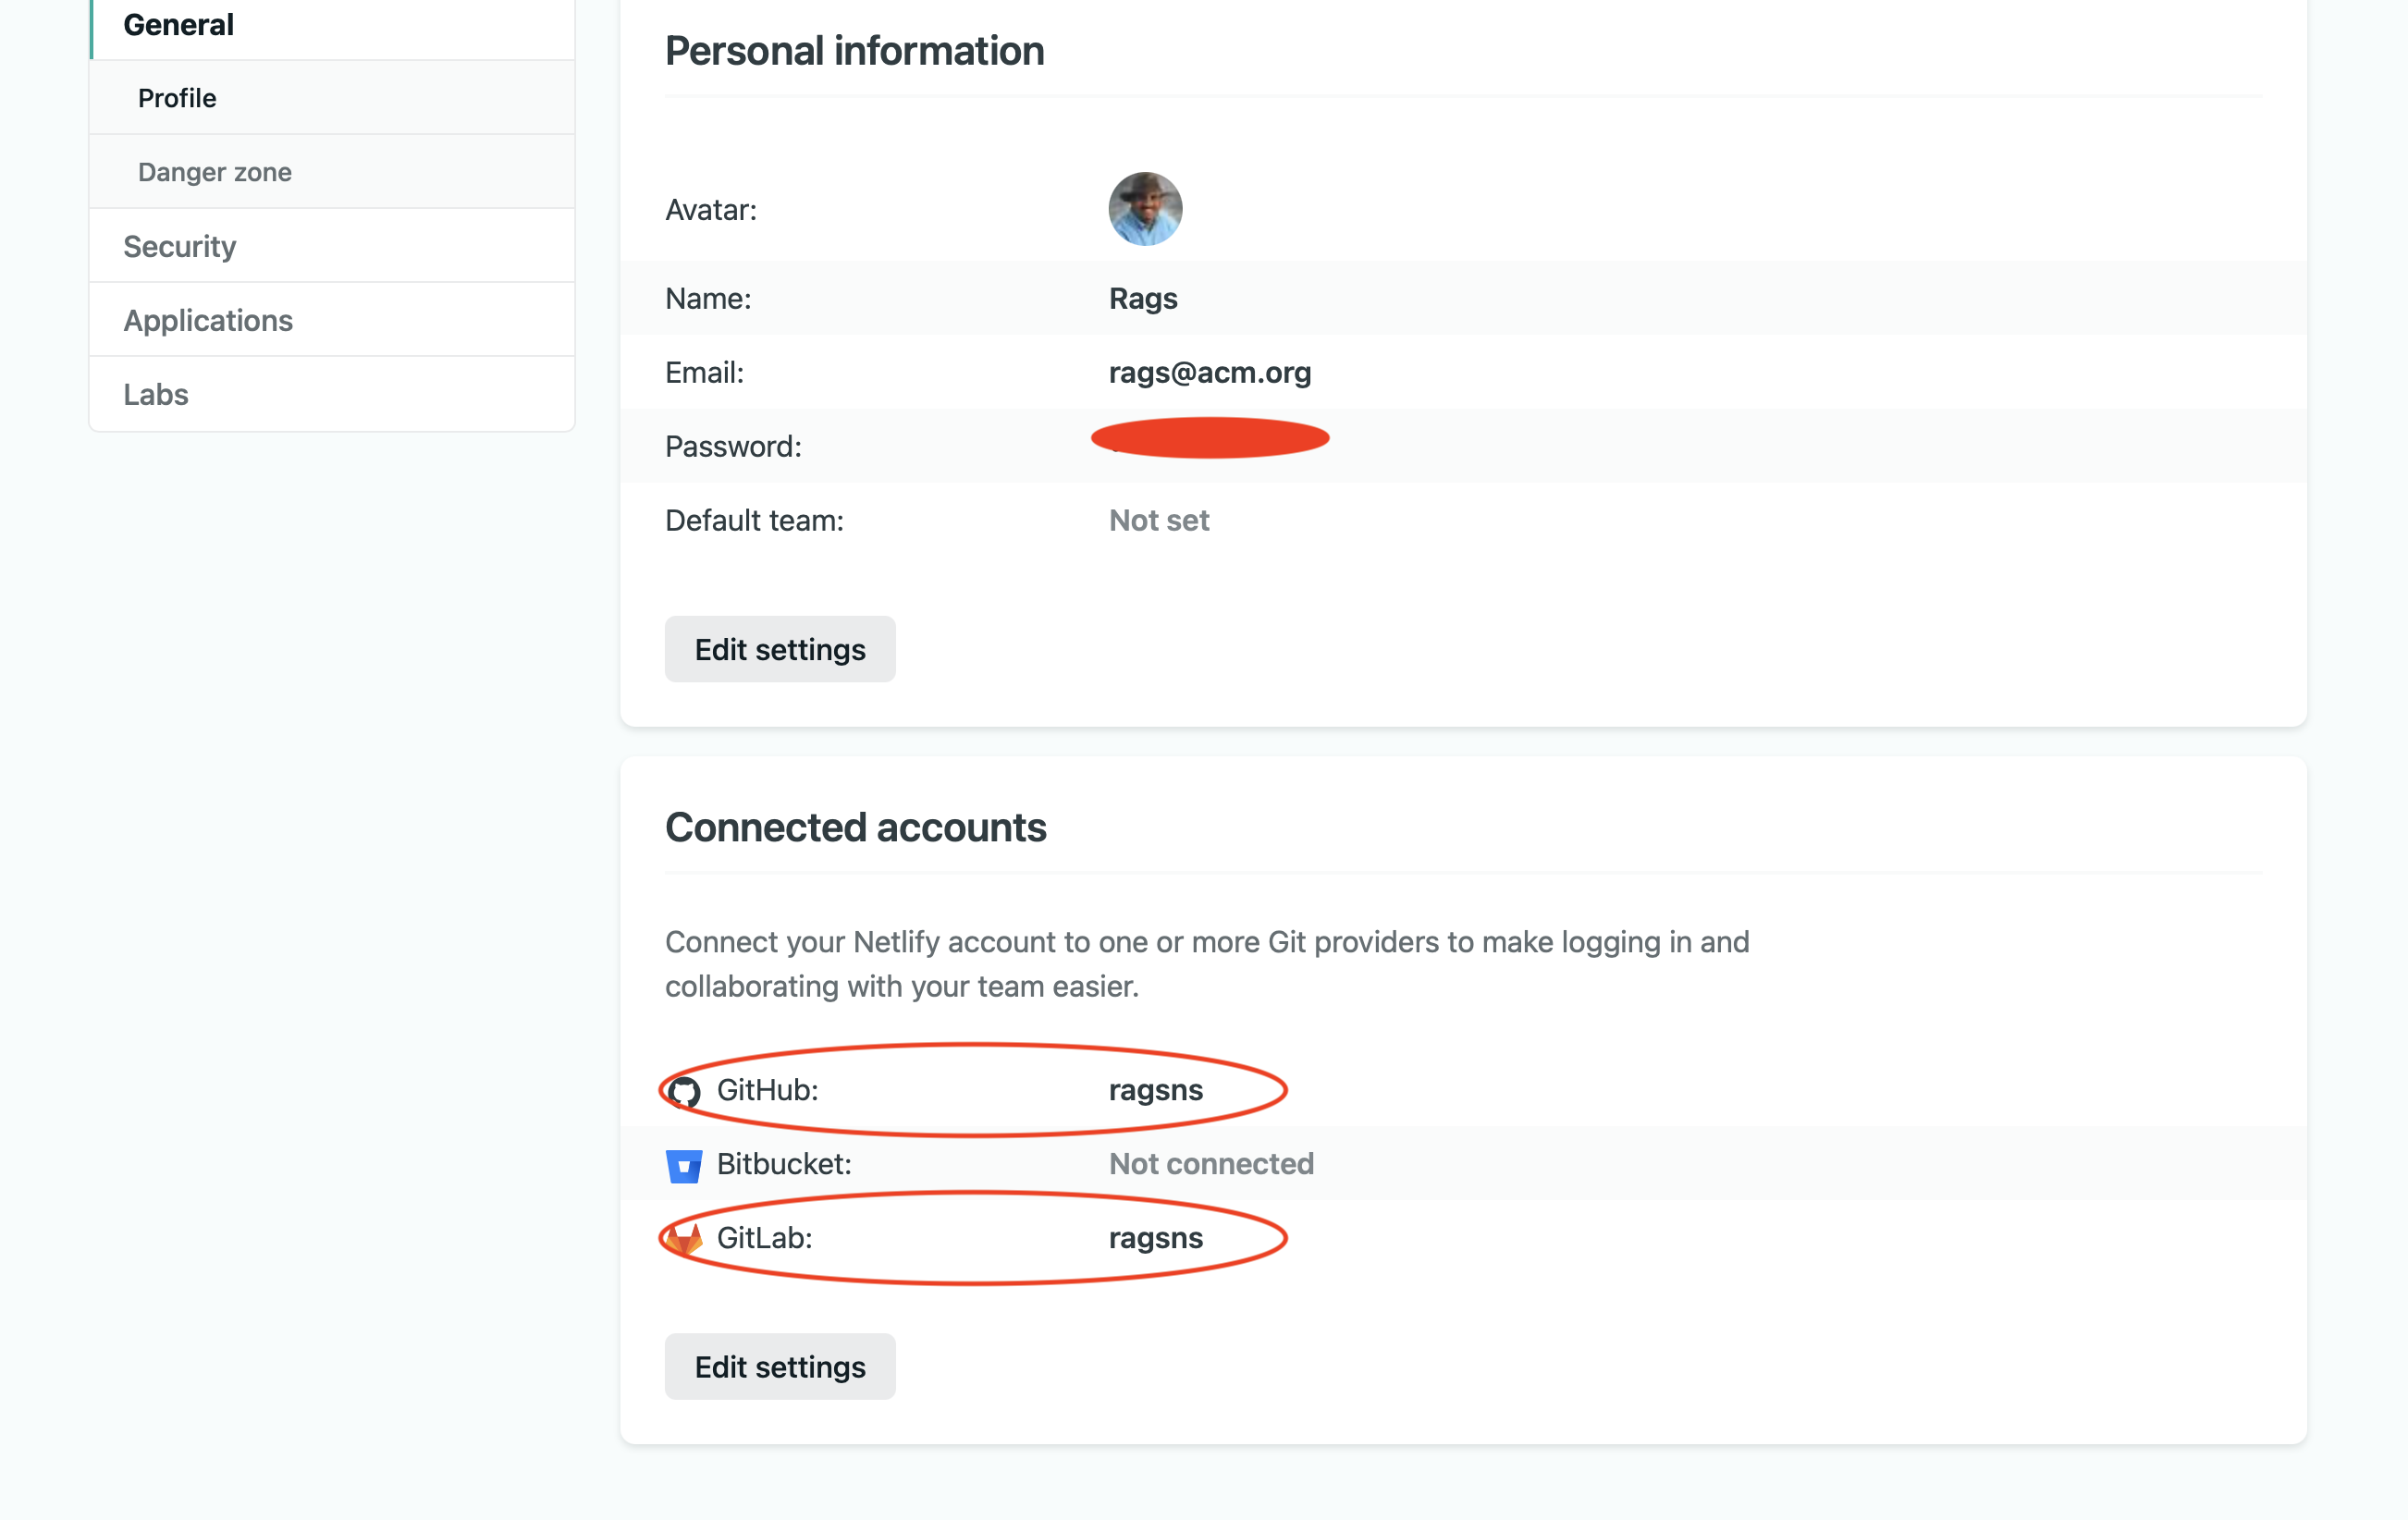 Deploy to Netlify, "connected accounts"